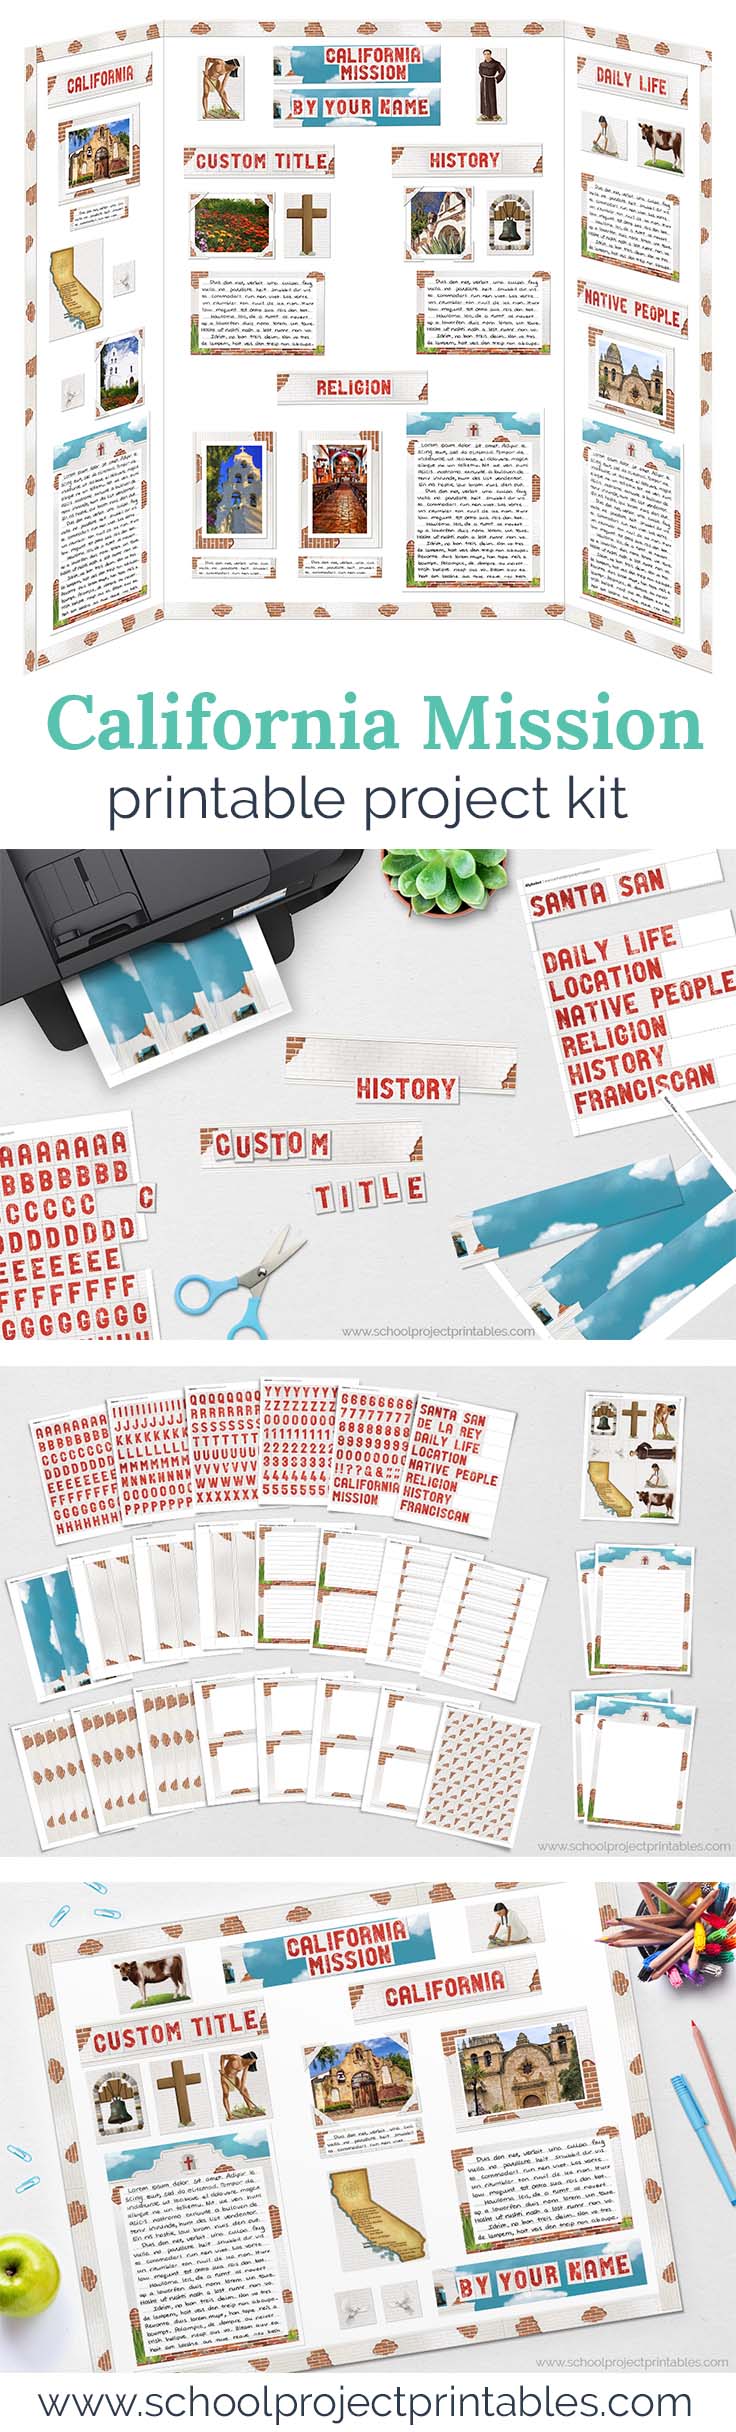 Long Pinterest Pin showing printable kit to make a poster board for a California Missions school project